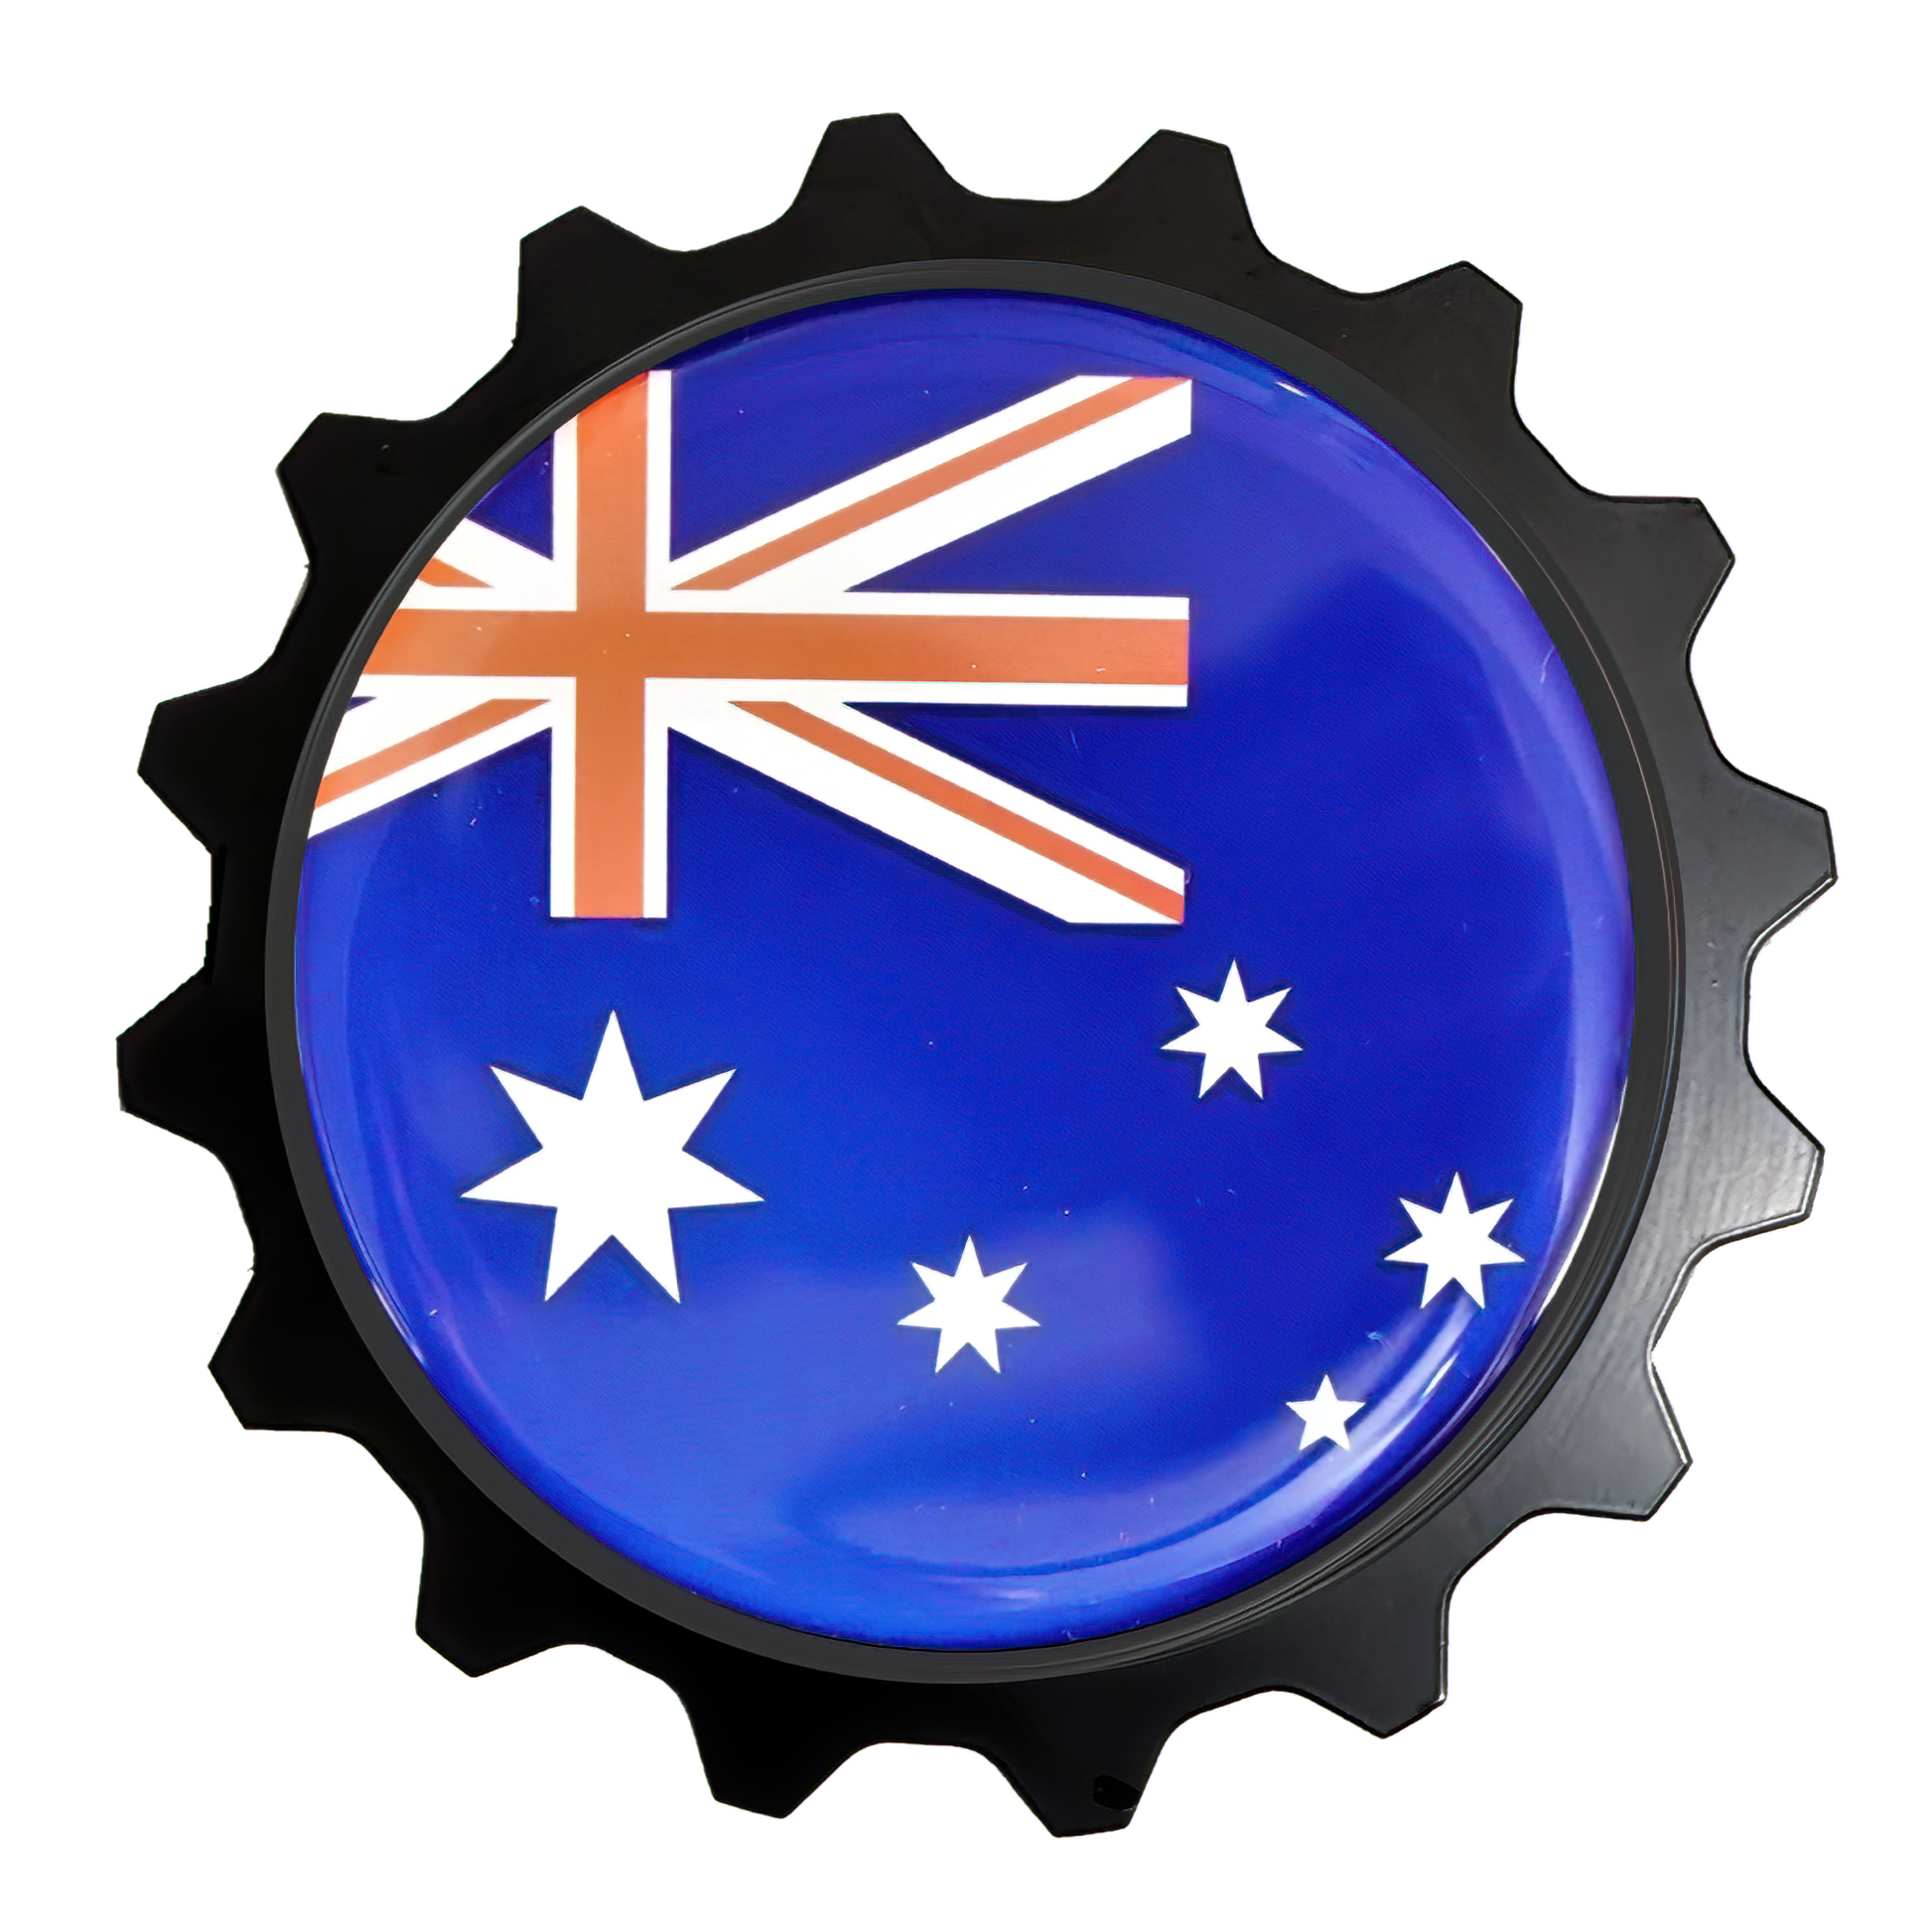 Australia Flag Emblem Badge, often used by 4x4 or car clubs so the group has a similar identifier on the grille. These badge kits look great on Toyota, Jeep, Bronco, Ram & Nissan trucks